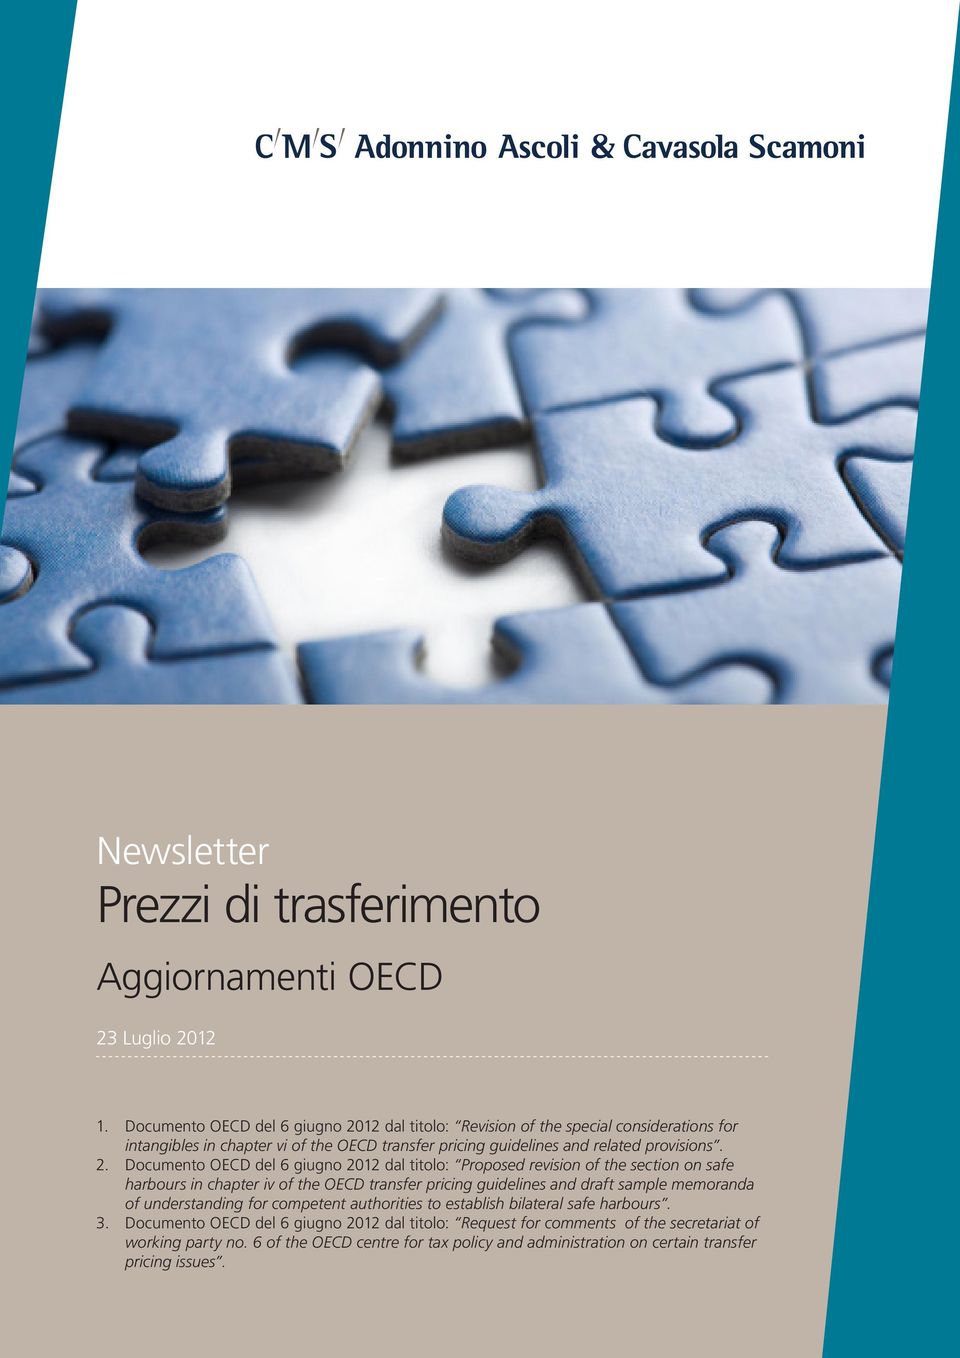 2. Documento OECD del 6 giugno 2012 dal titolo: Proposed revision of the section on safe harbours in chapter iv of the OECD transfer pricing guidelines and draft sample